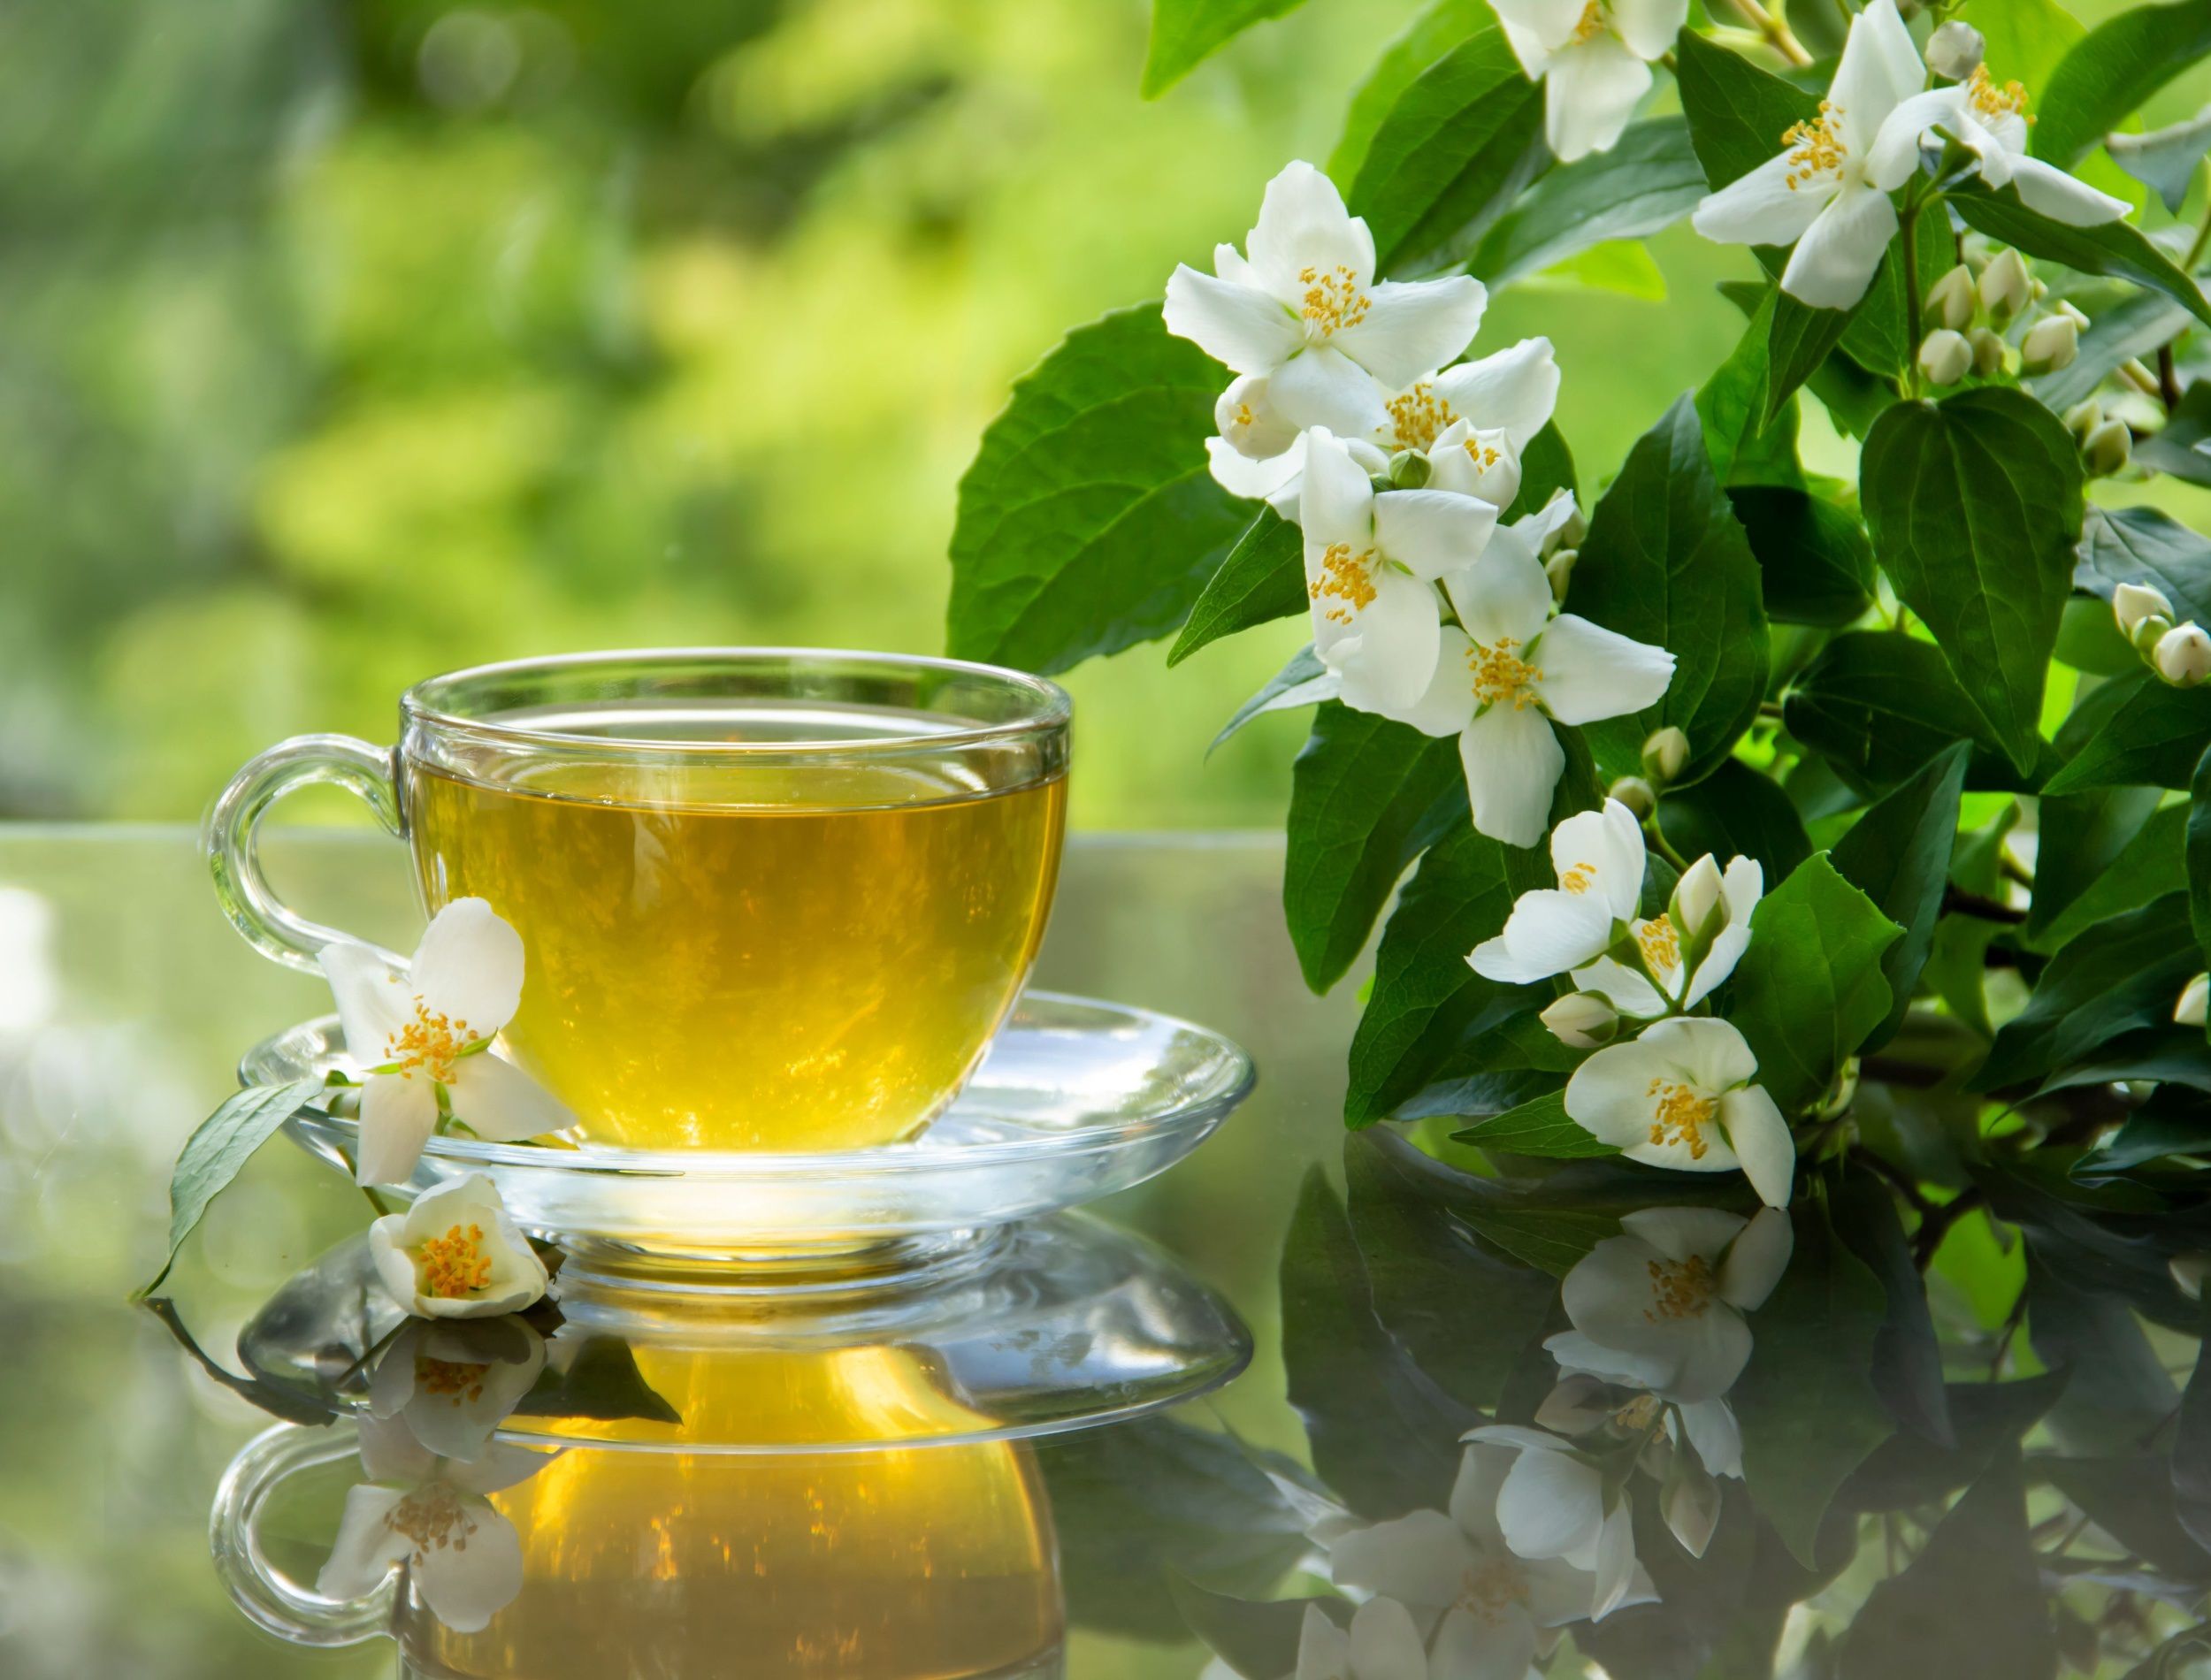 jasmine flowers and vine with cup of tea on a table